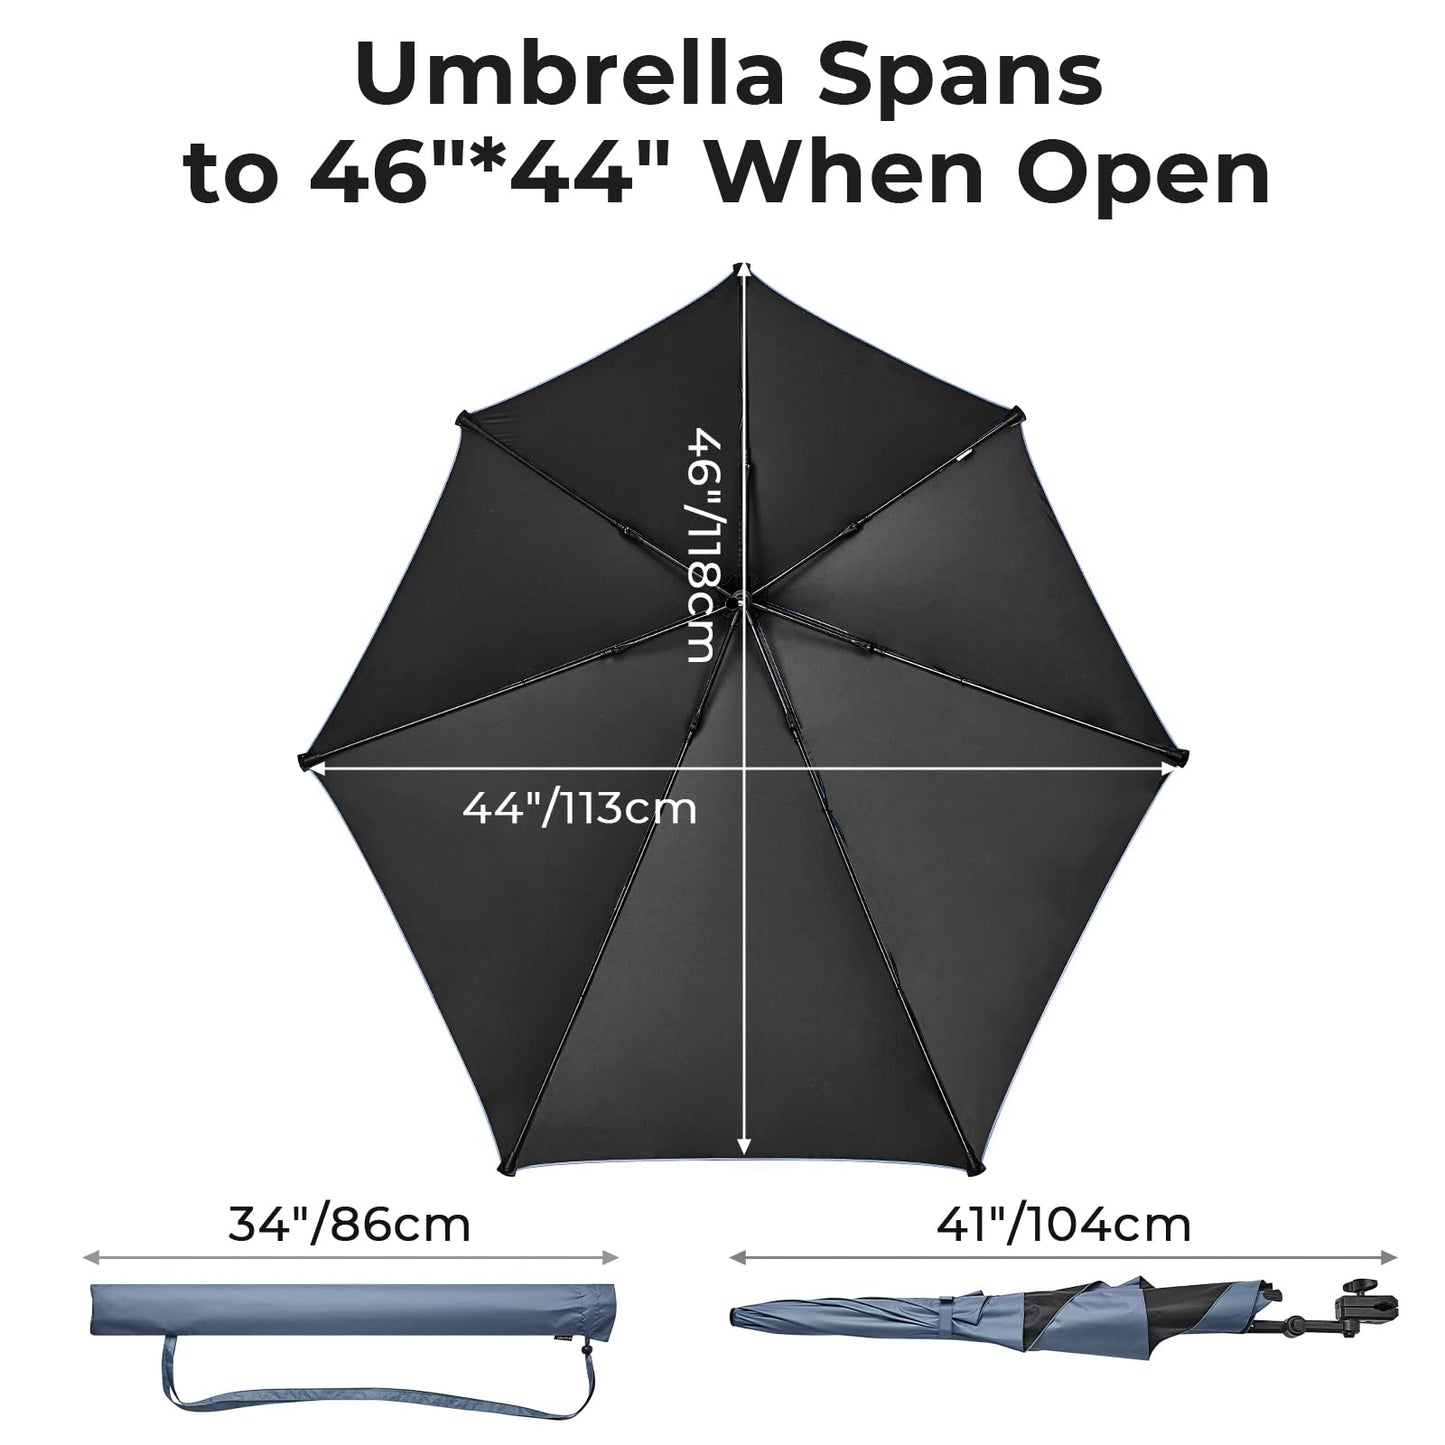 G4Free UPF 50+ Adjustable Beach Umbrella XL with Universal Clamp for Chair